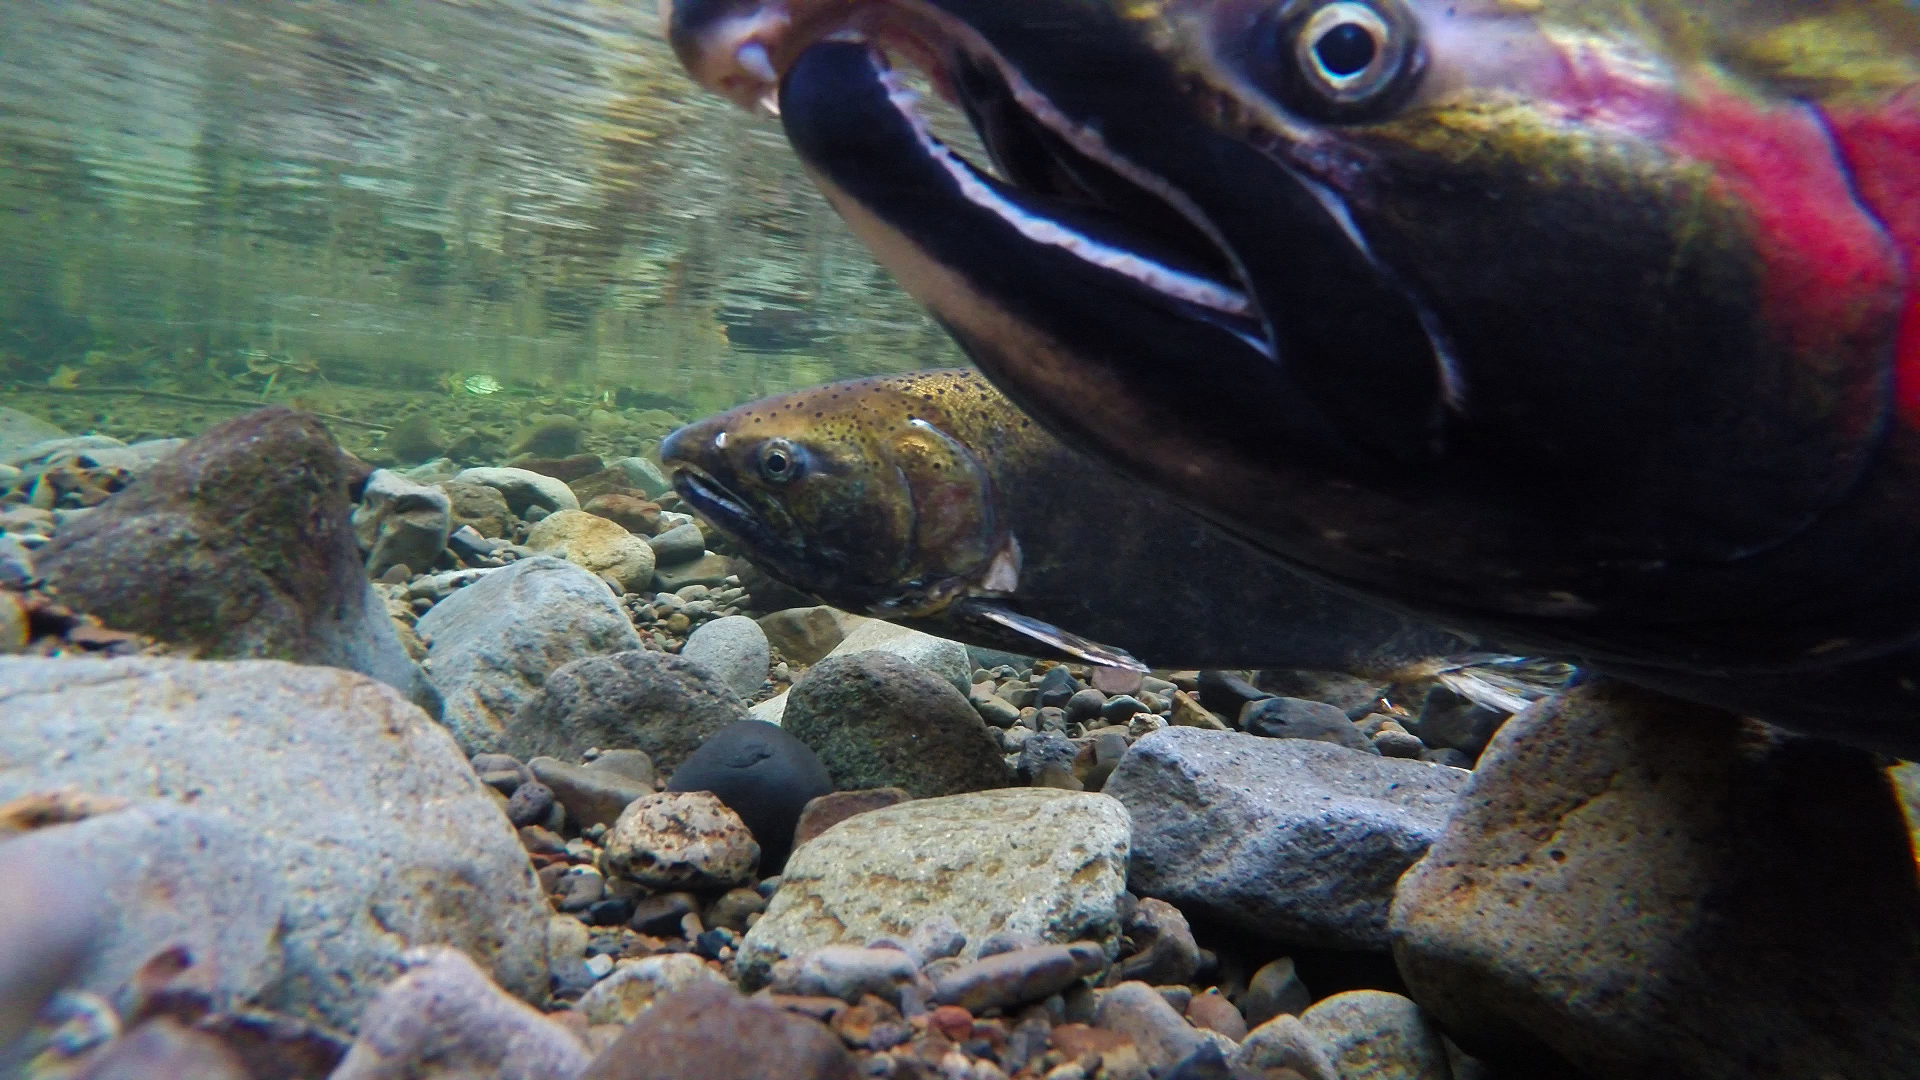 Salmon Farming: How Is This Agricultural Operation Harming Pacific Northwest Ecosystems?